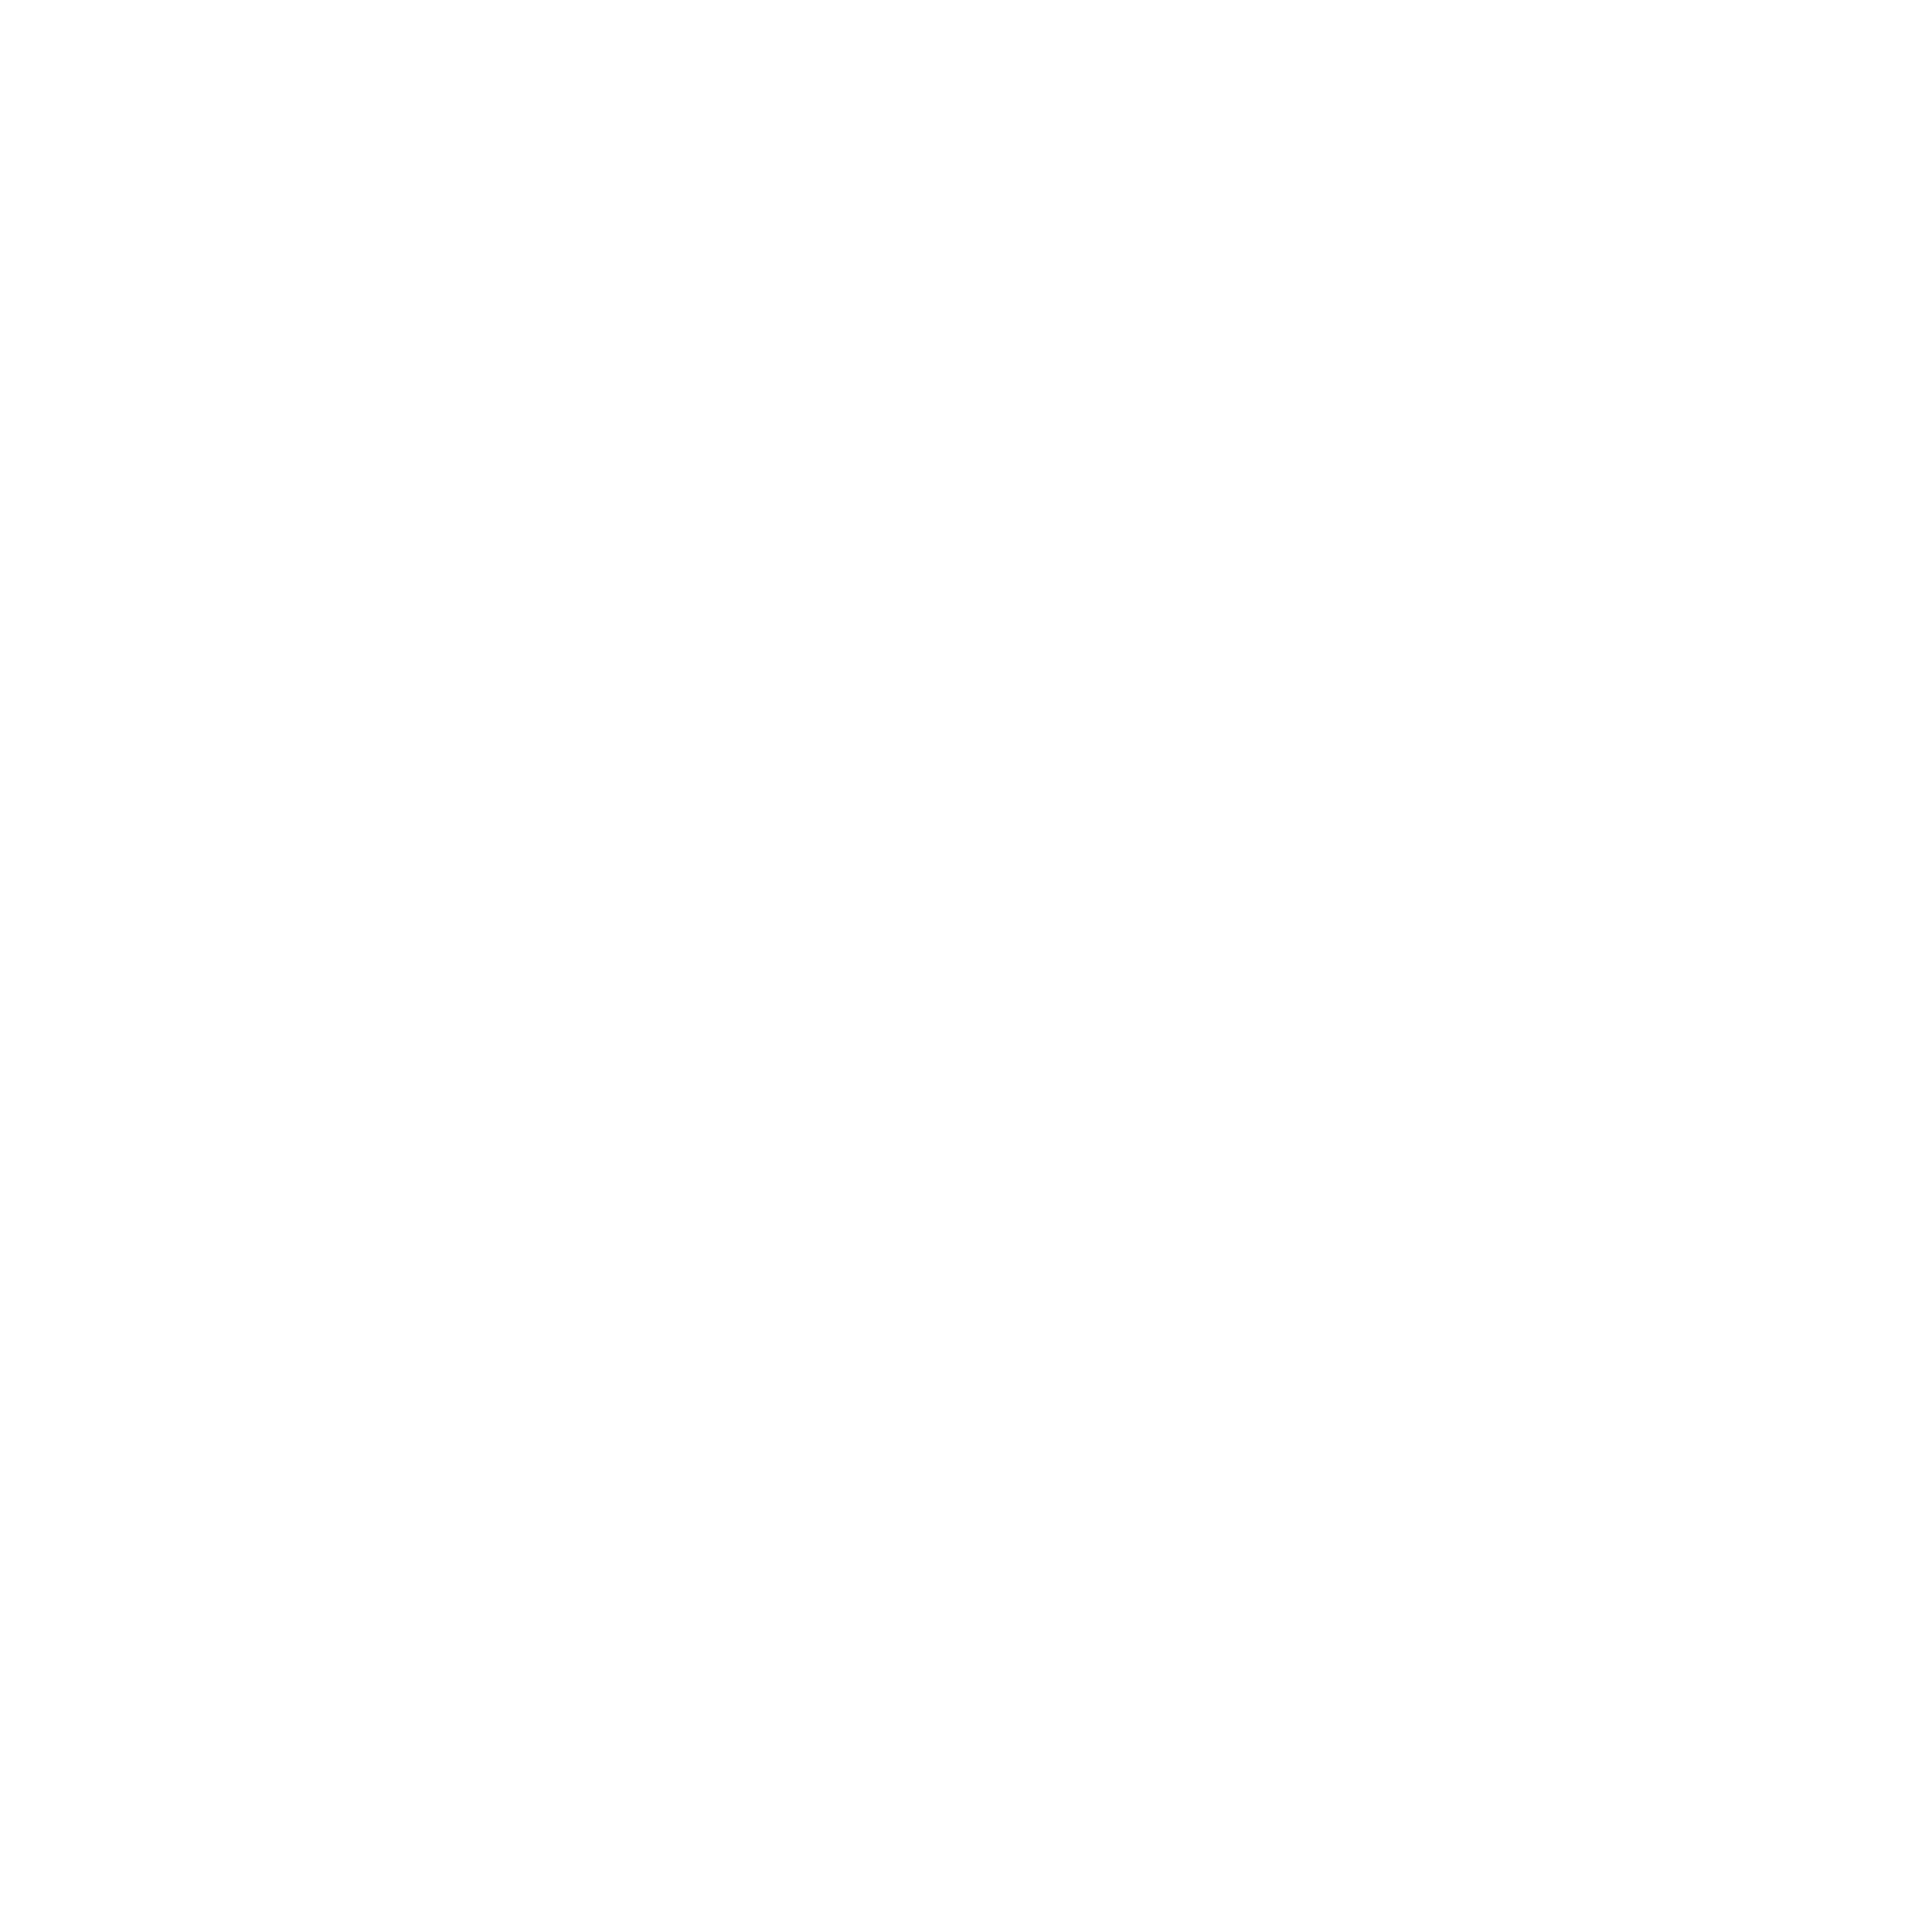 Information, Tickets and Travel